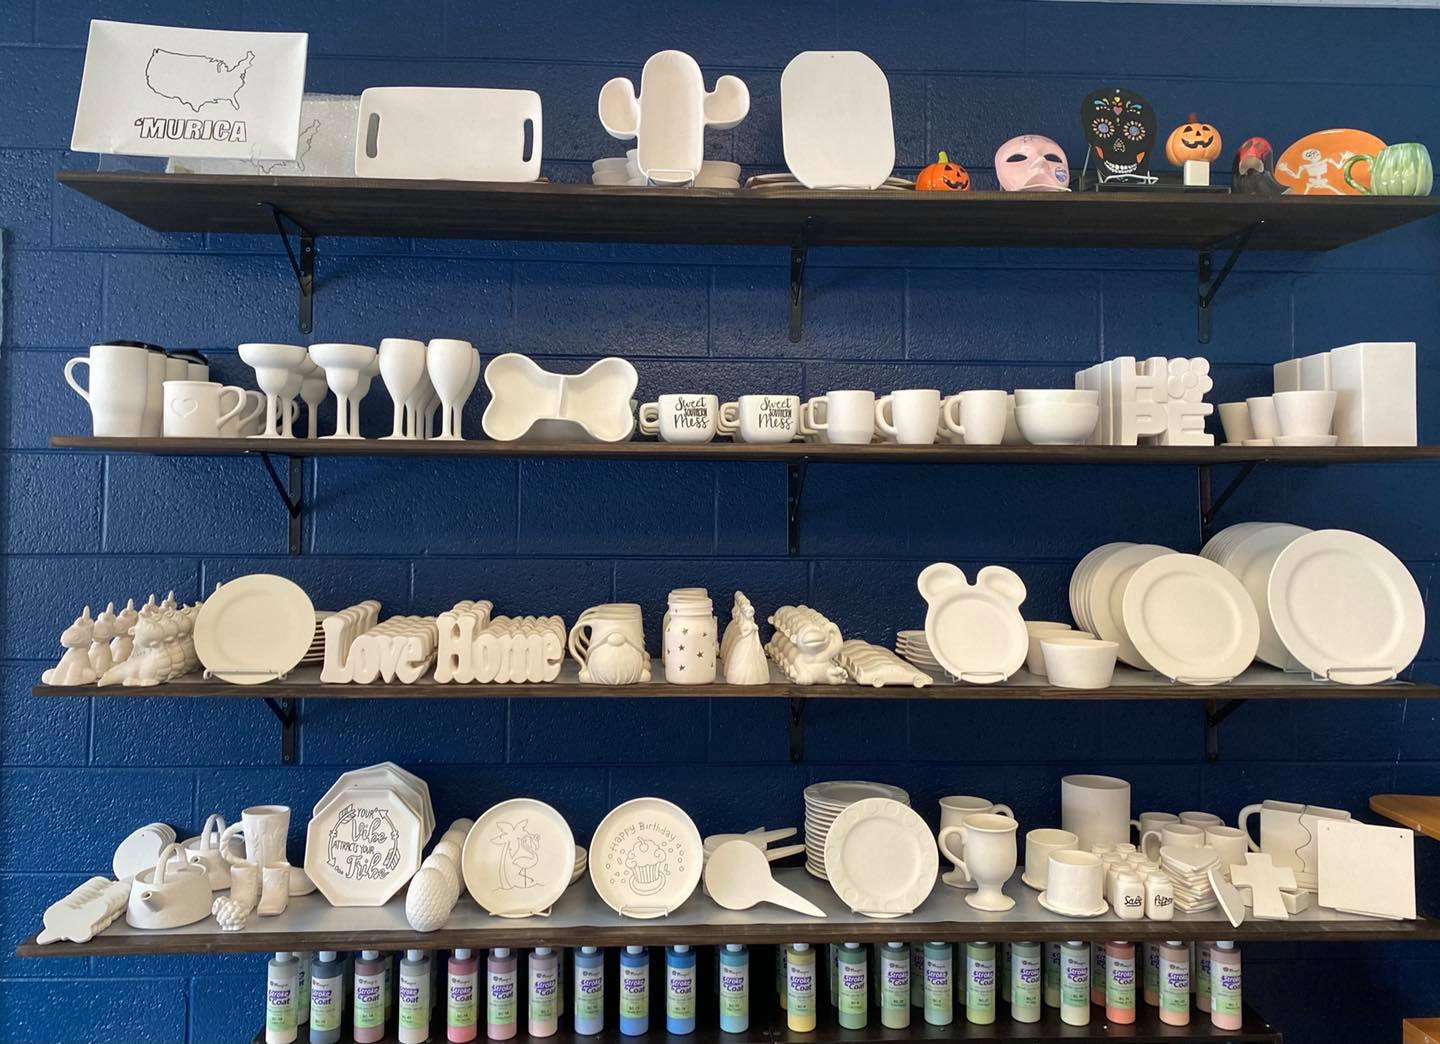 The Pottery Parlor, Homepage